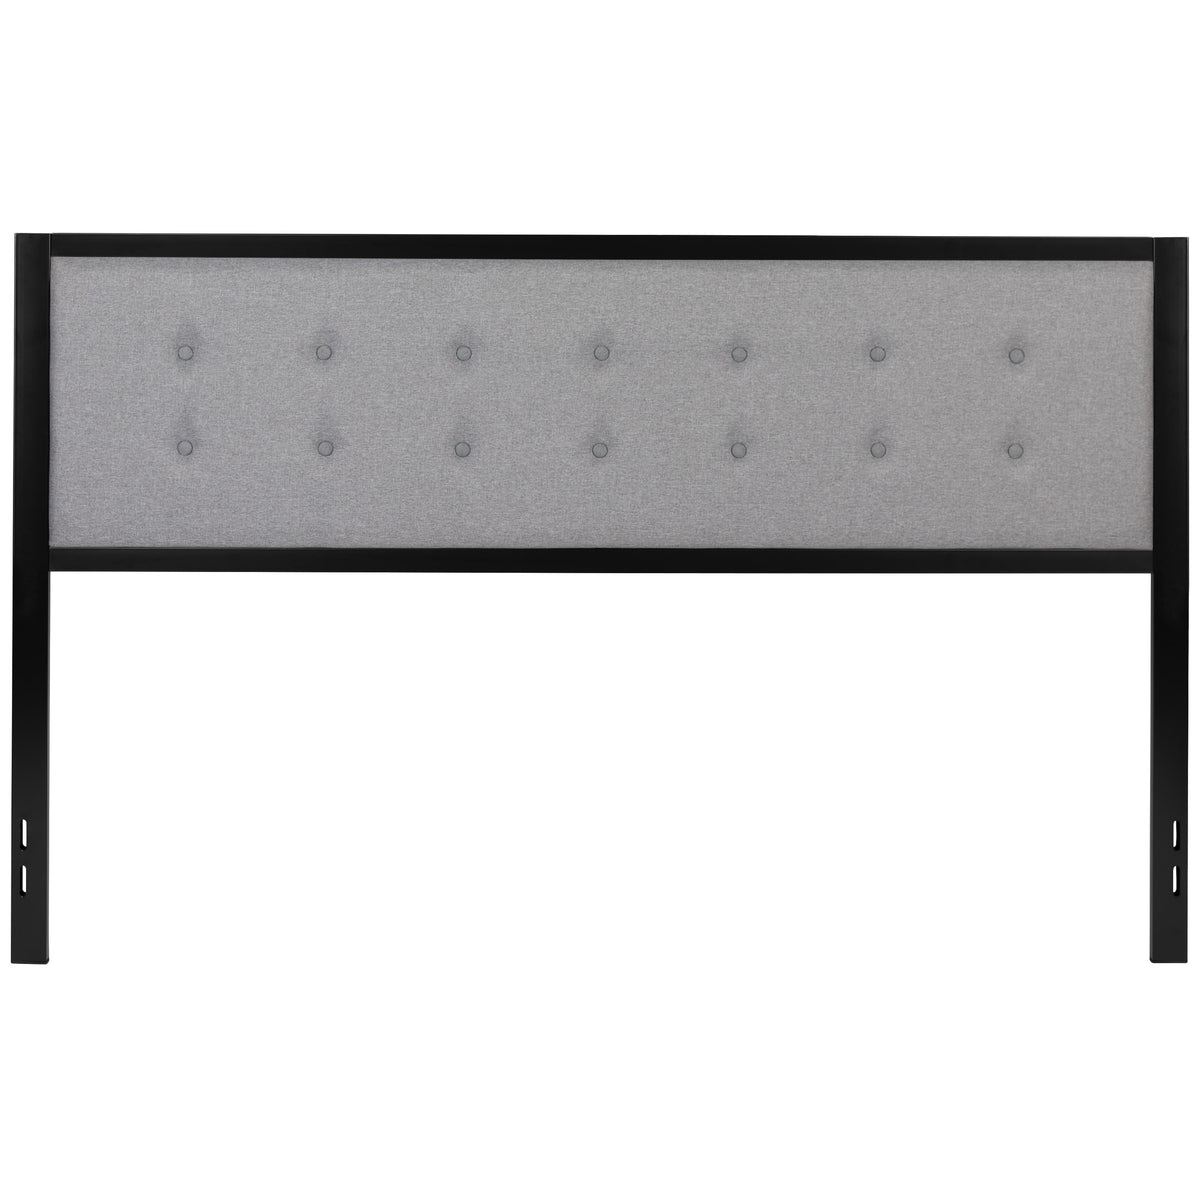 Light Gray,King |#| King Size Upholstered Metal Panel Headboard in Tufted Light Gray Fabric